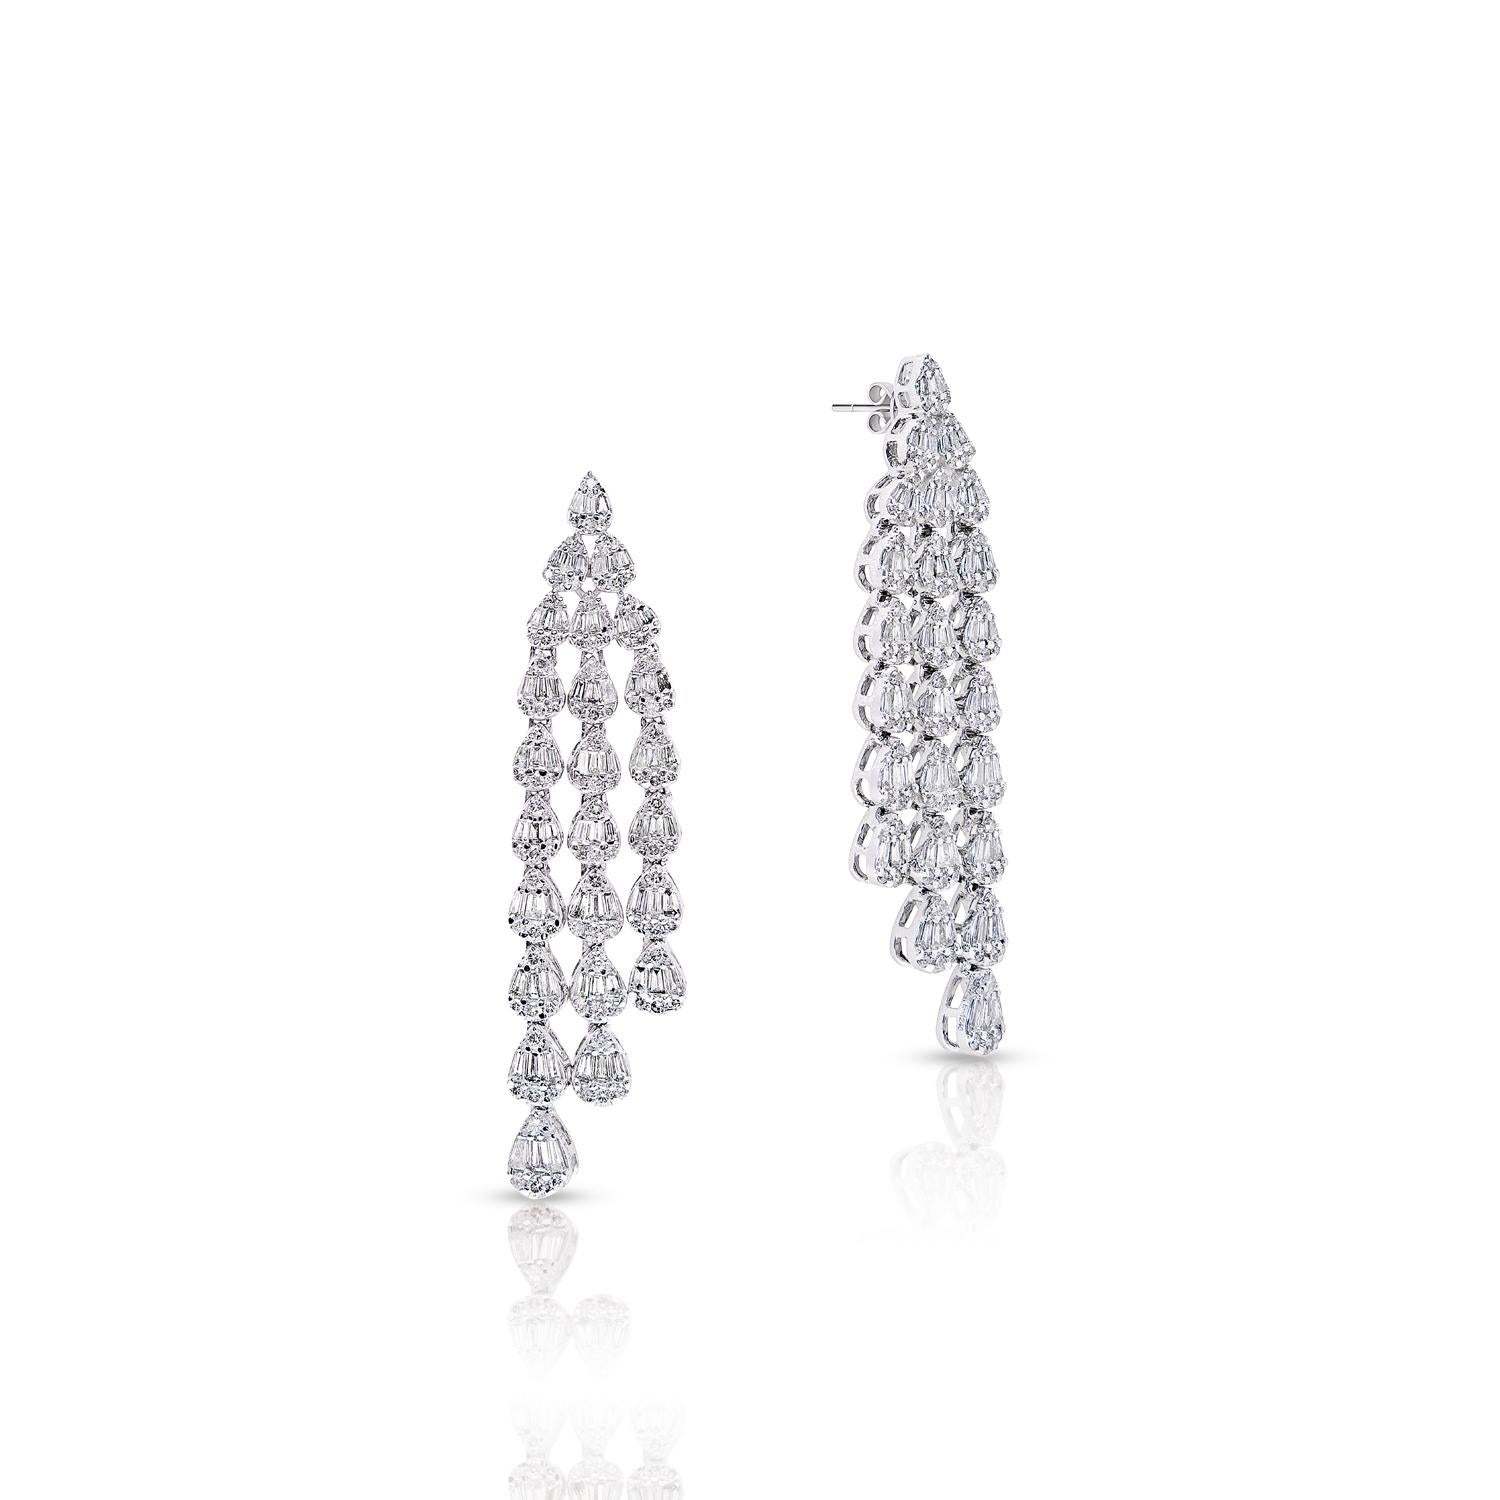 Crafted from premium-quality 14-karat white gold and featuring a stunning carat weight of 3.21 carats, these earrings are sure to turn heads wherever you go. Perfect for any occasion, these stunning earrings are sure to be a treasured addition to